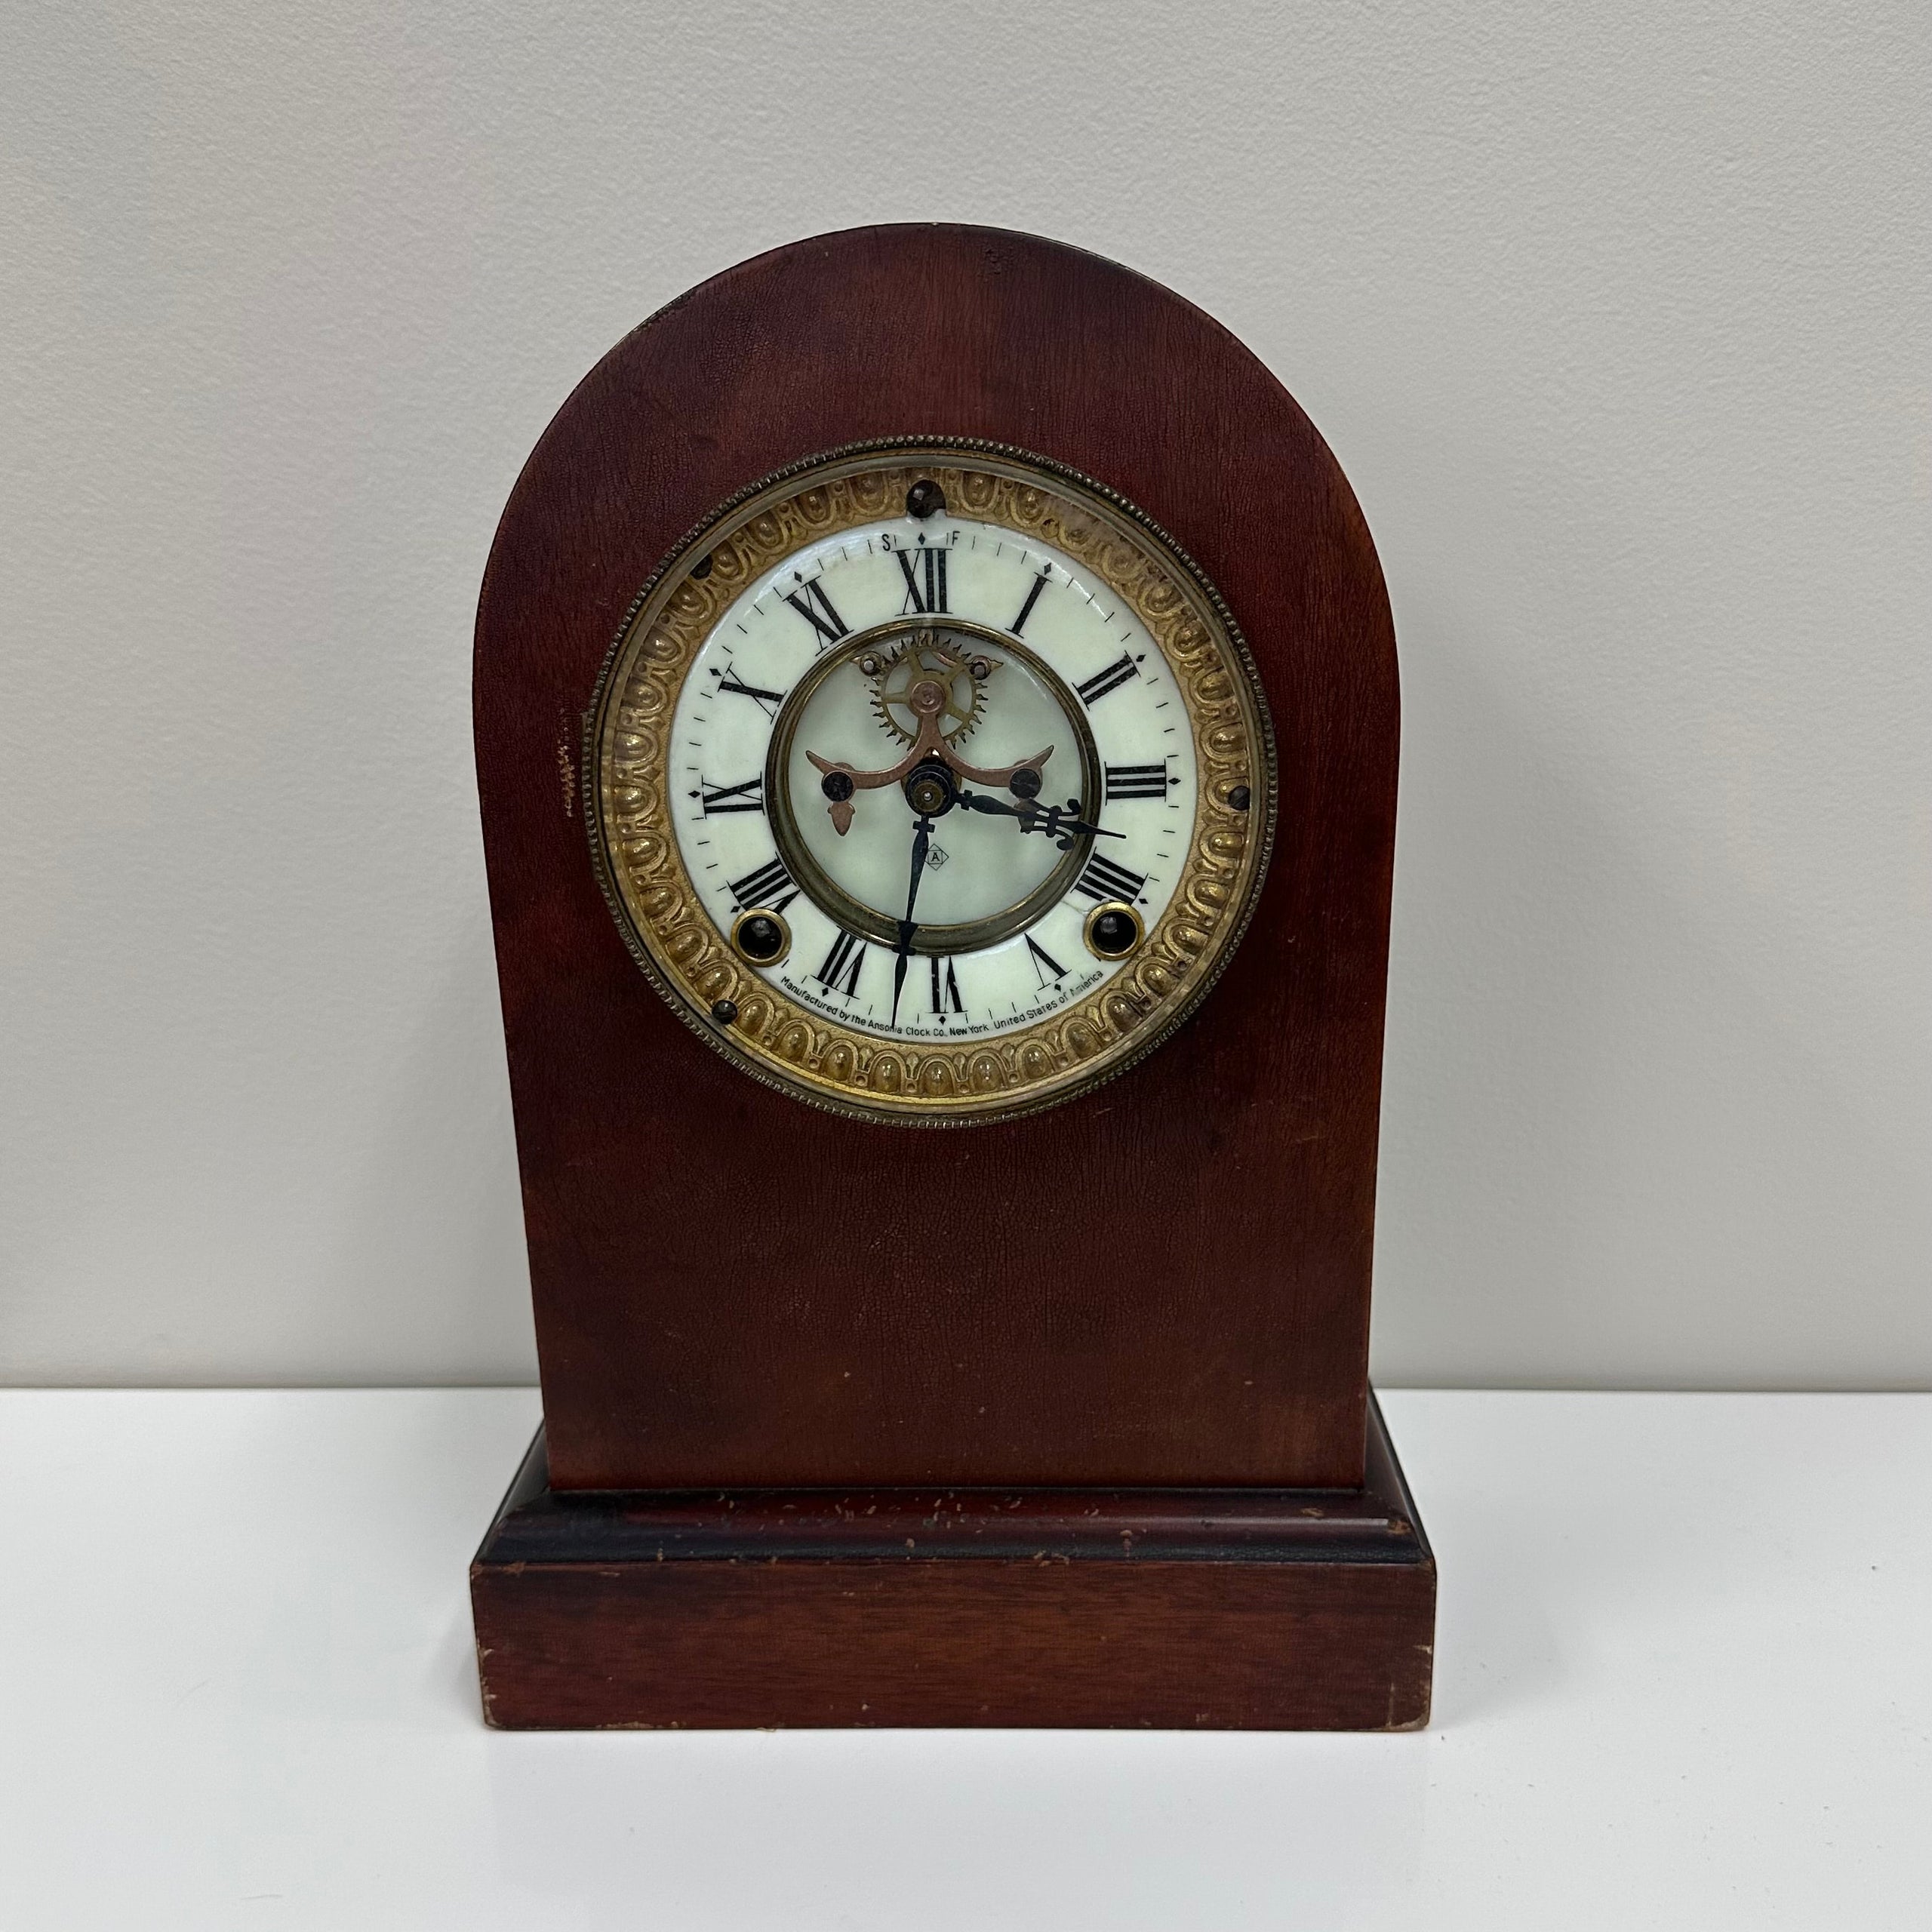 Antique Ansonia 8 Day Shelf Clock Featuring Antique Vintage And Mid Century Furnishings